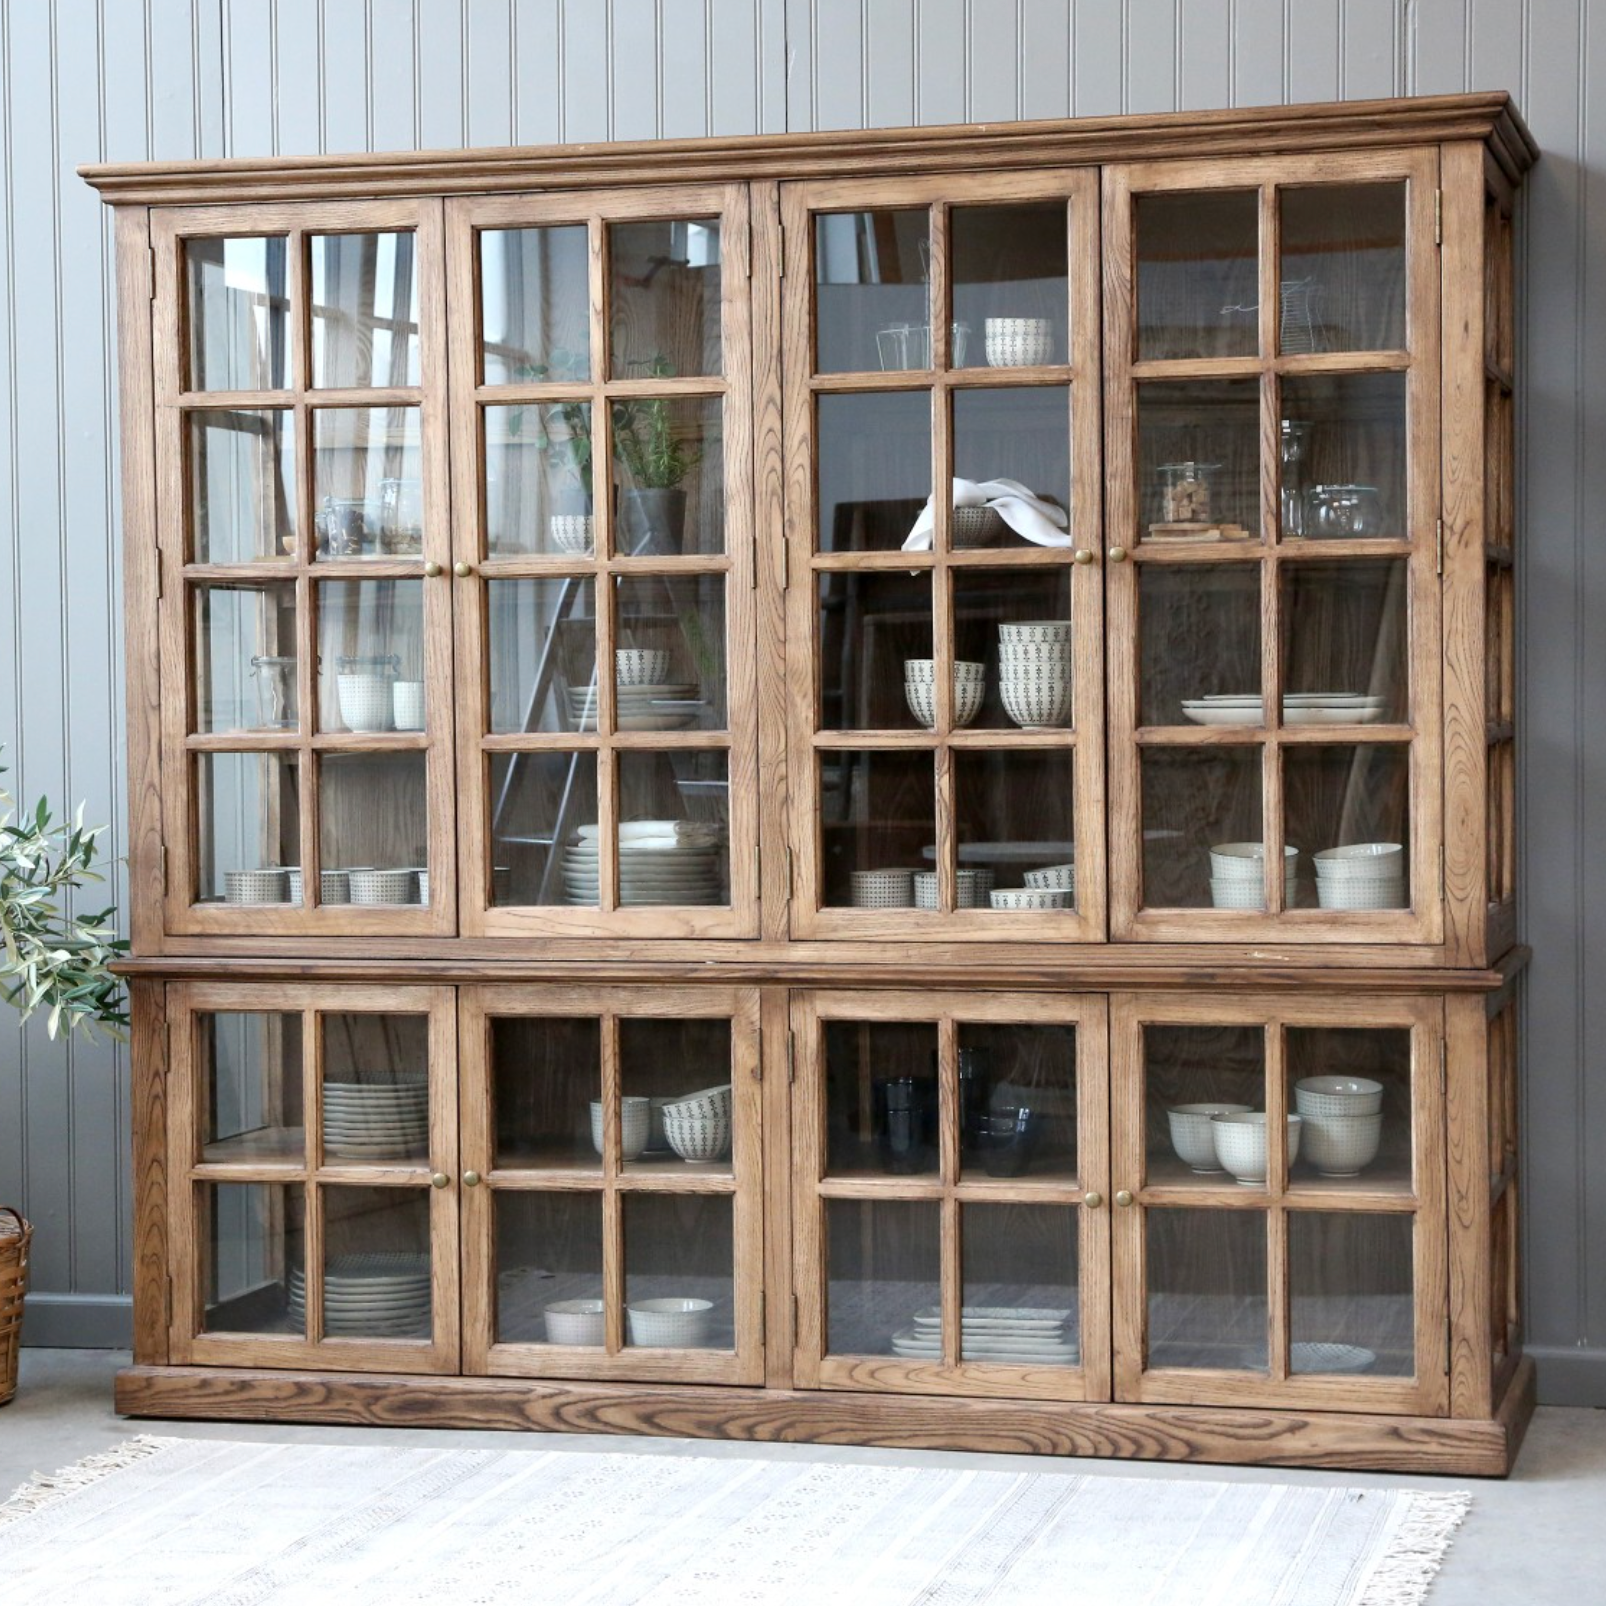 large wooden armoire displaying crockery and kitchen items. 